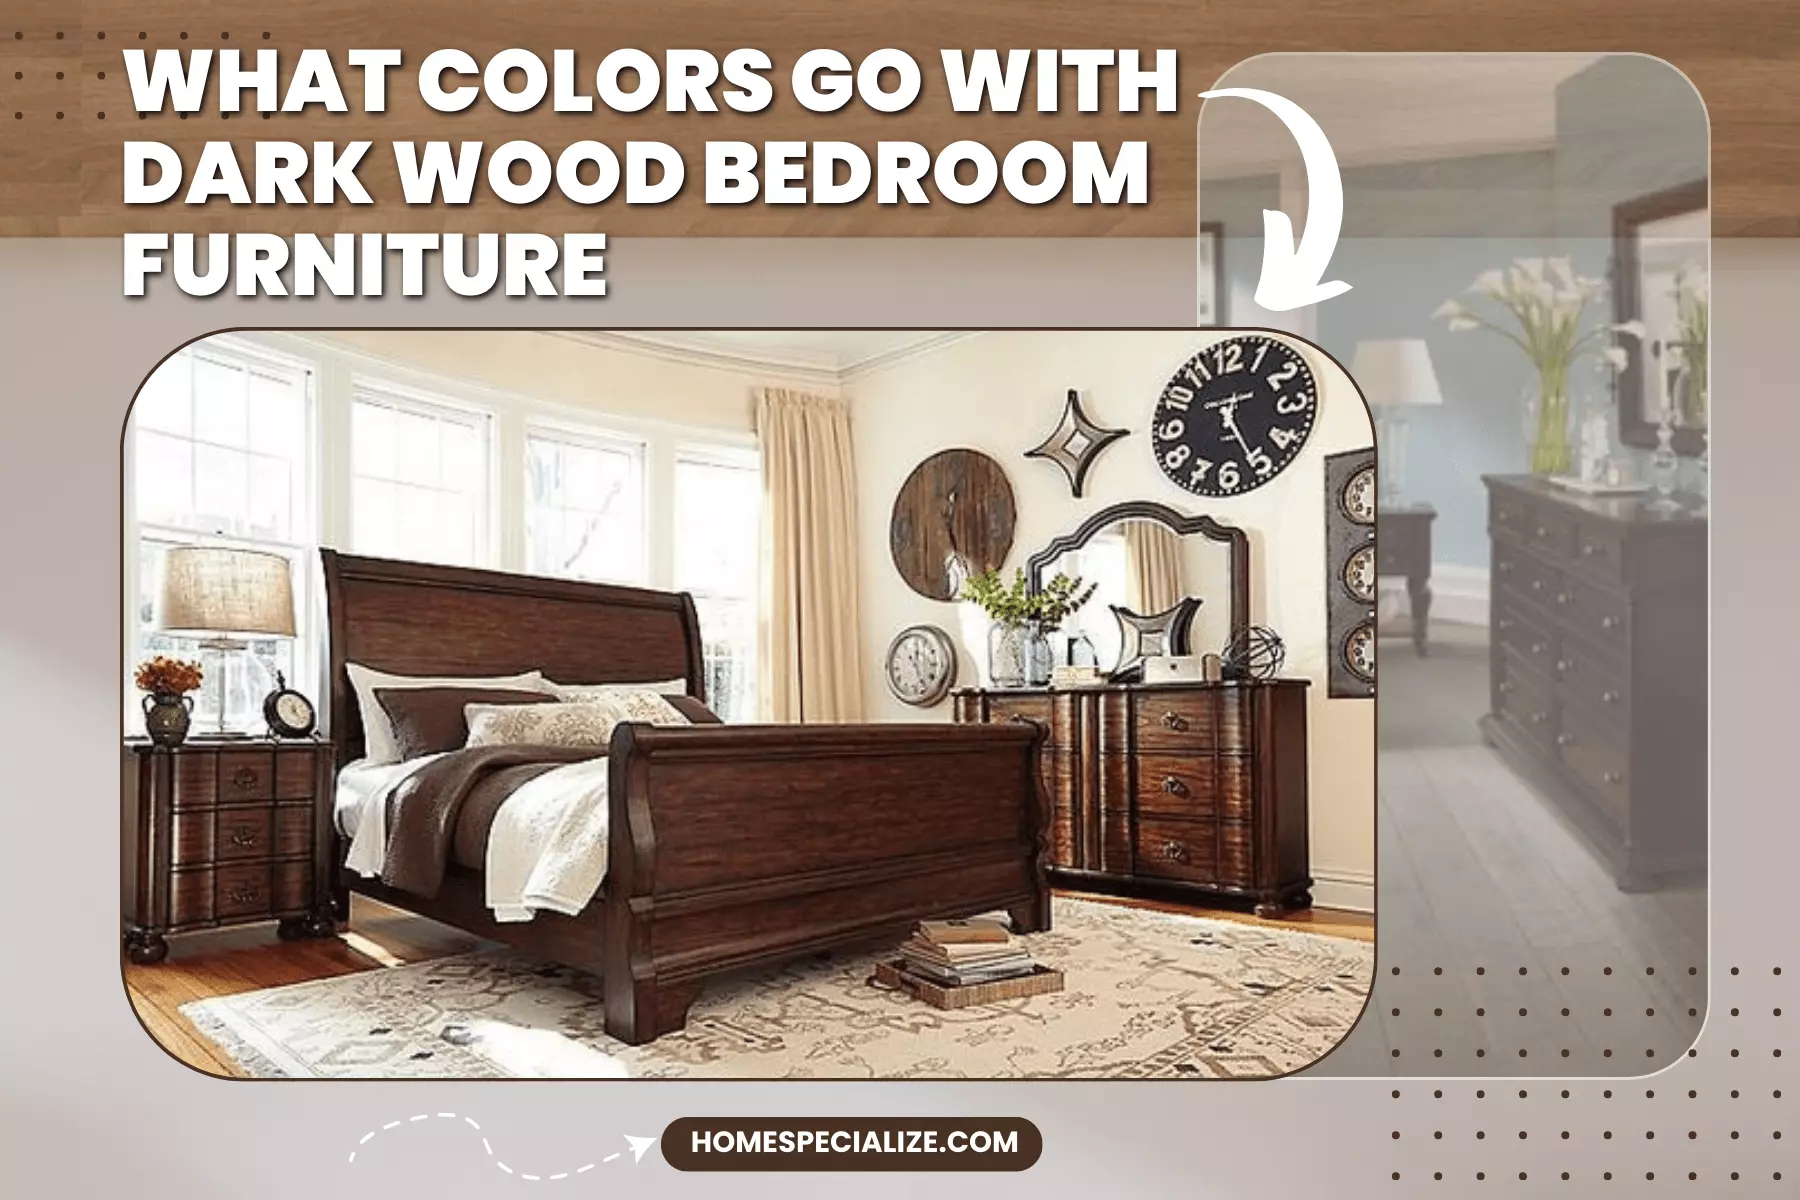 What colors go with dark wood bedroom furniture